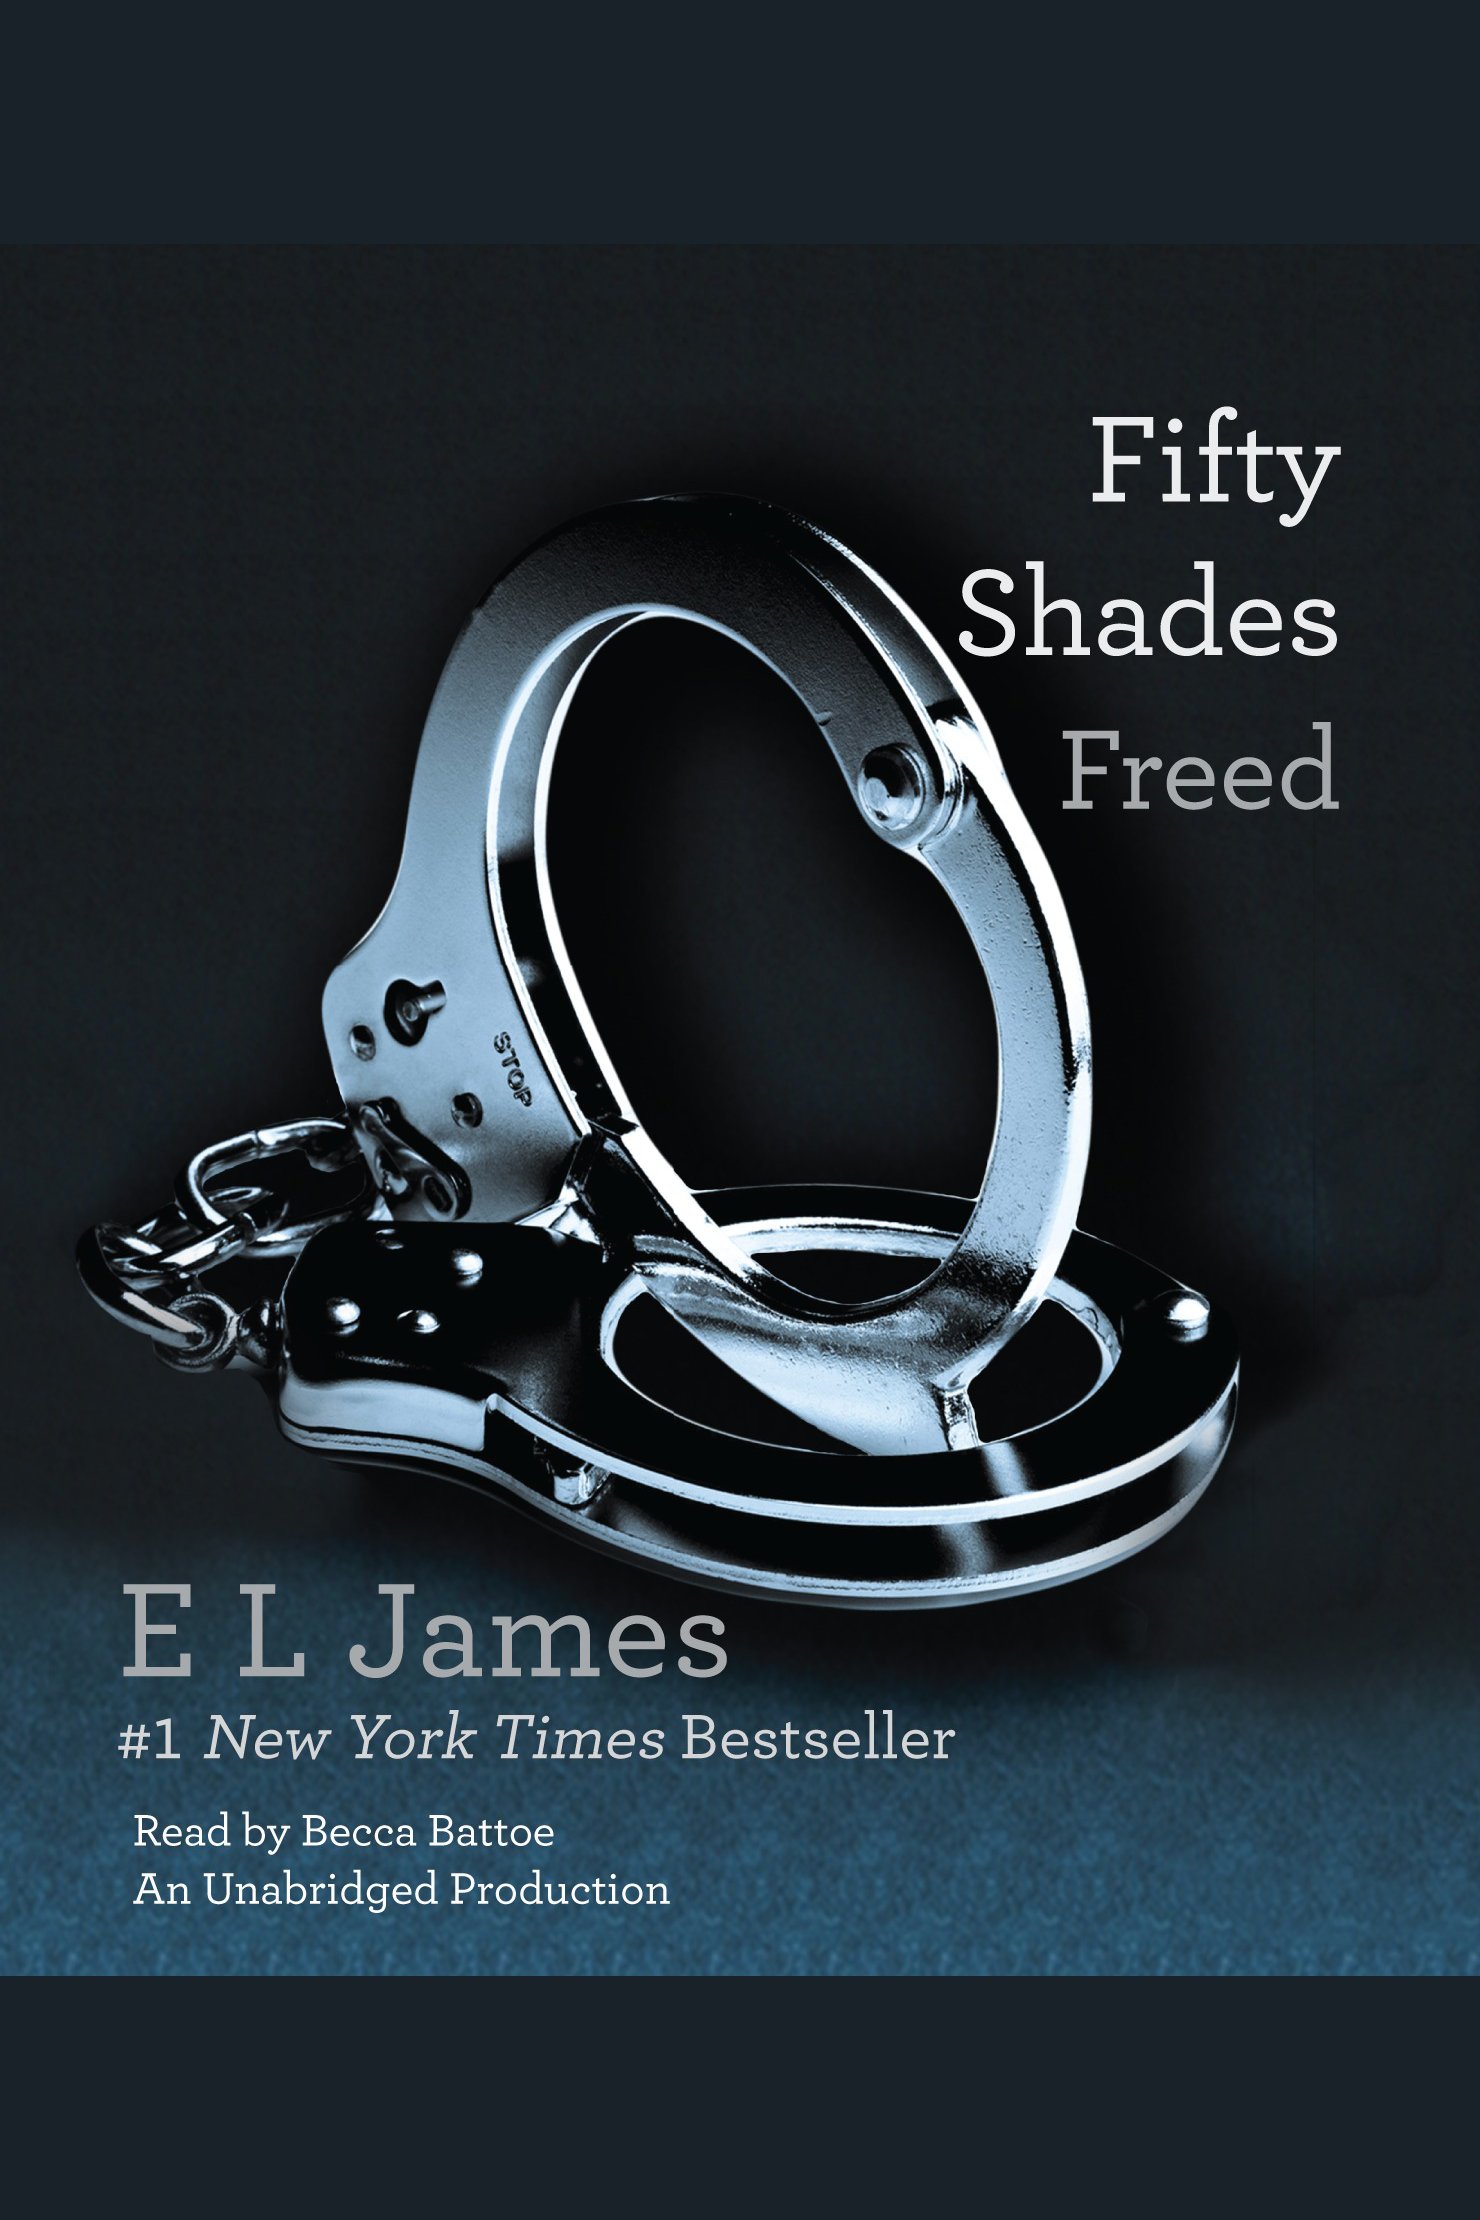 Fifty shades freed cover image